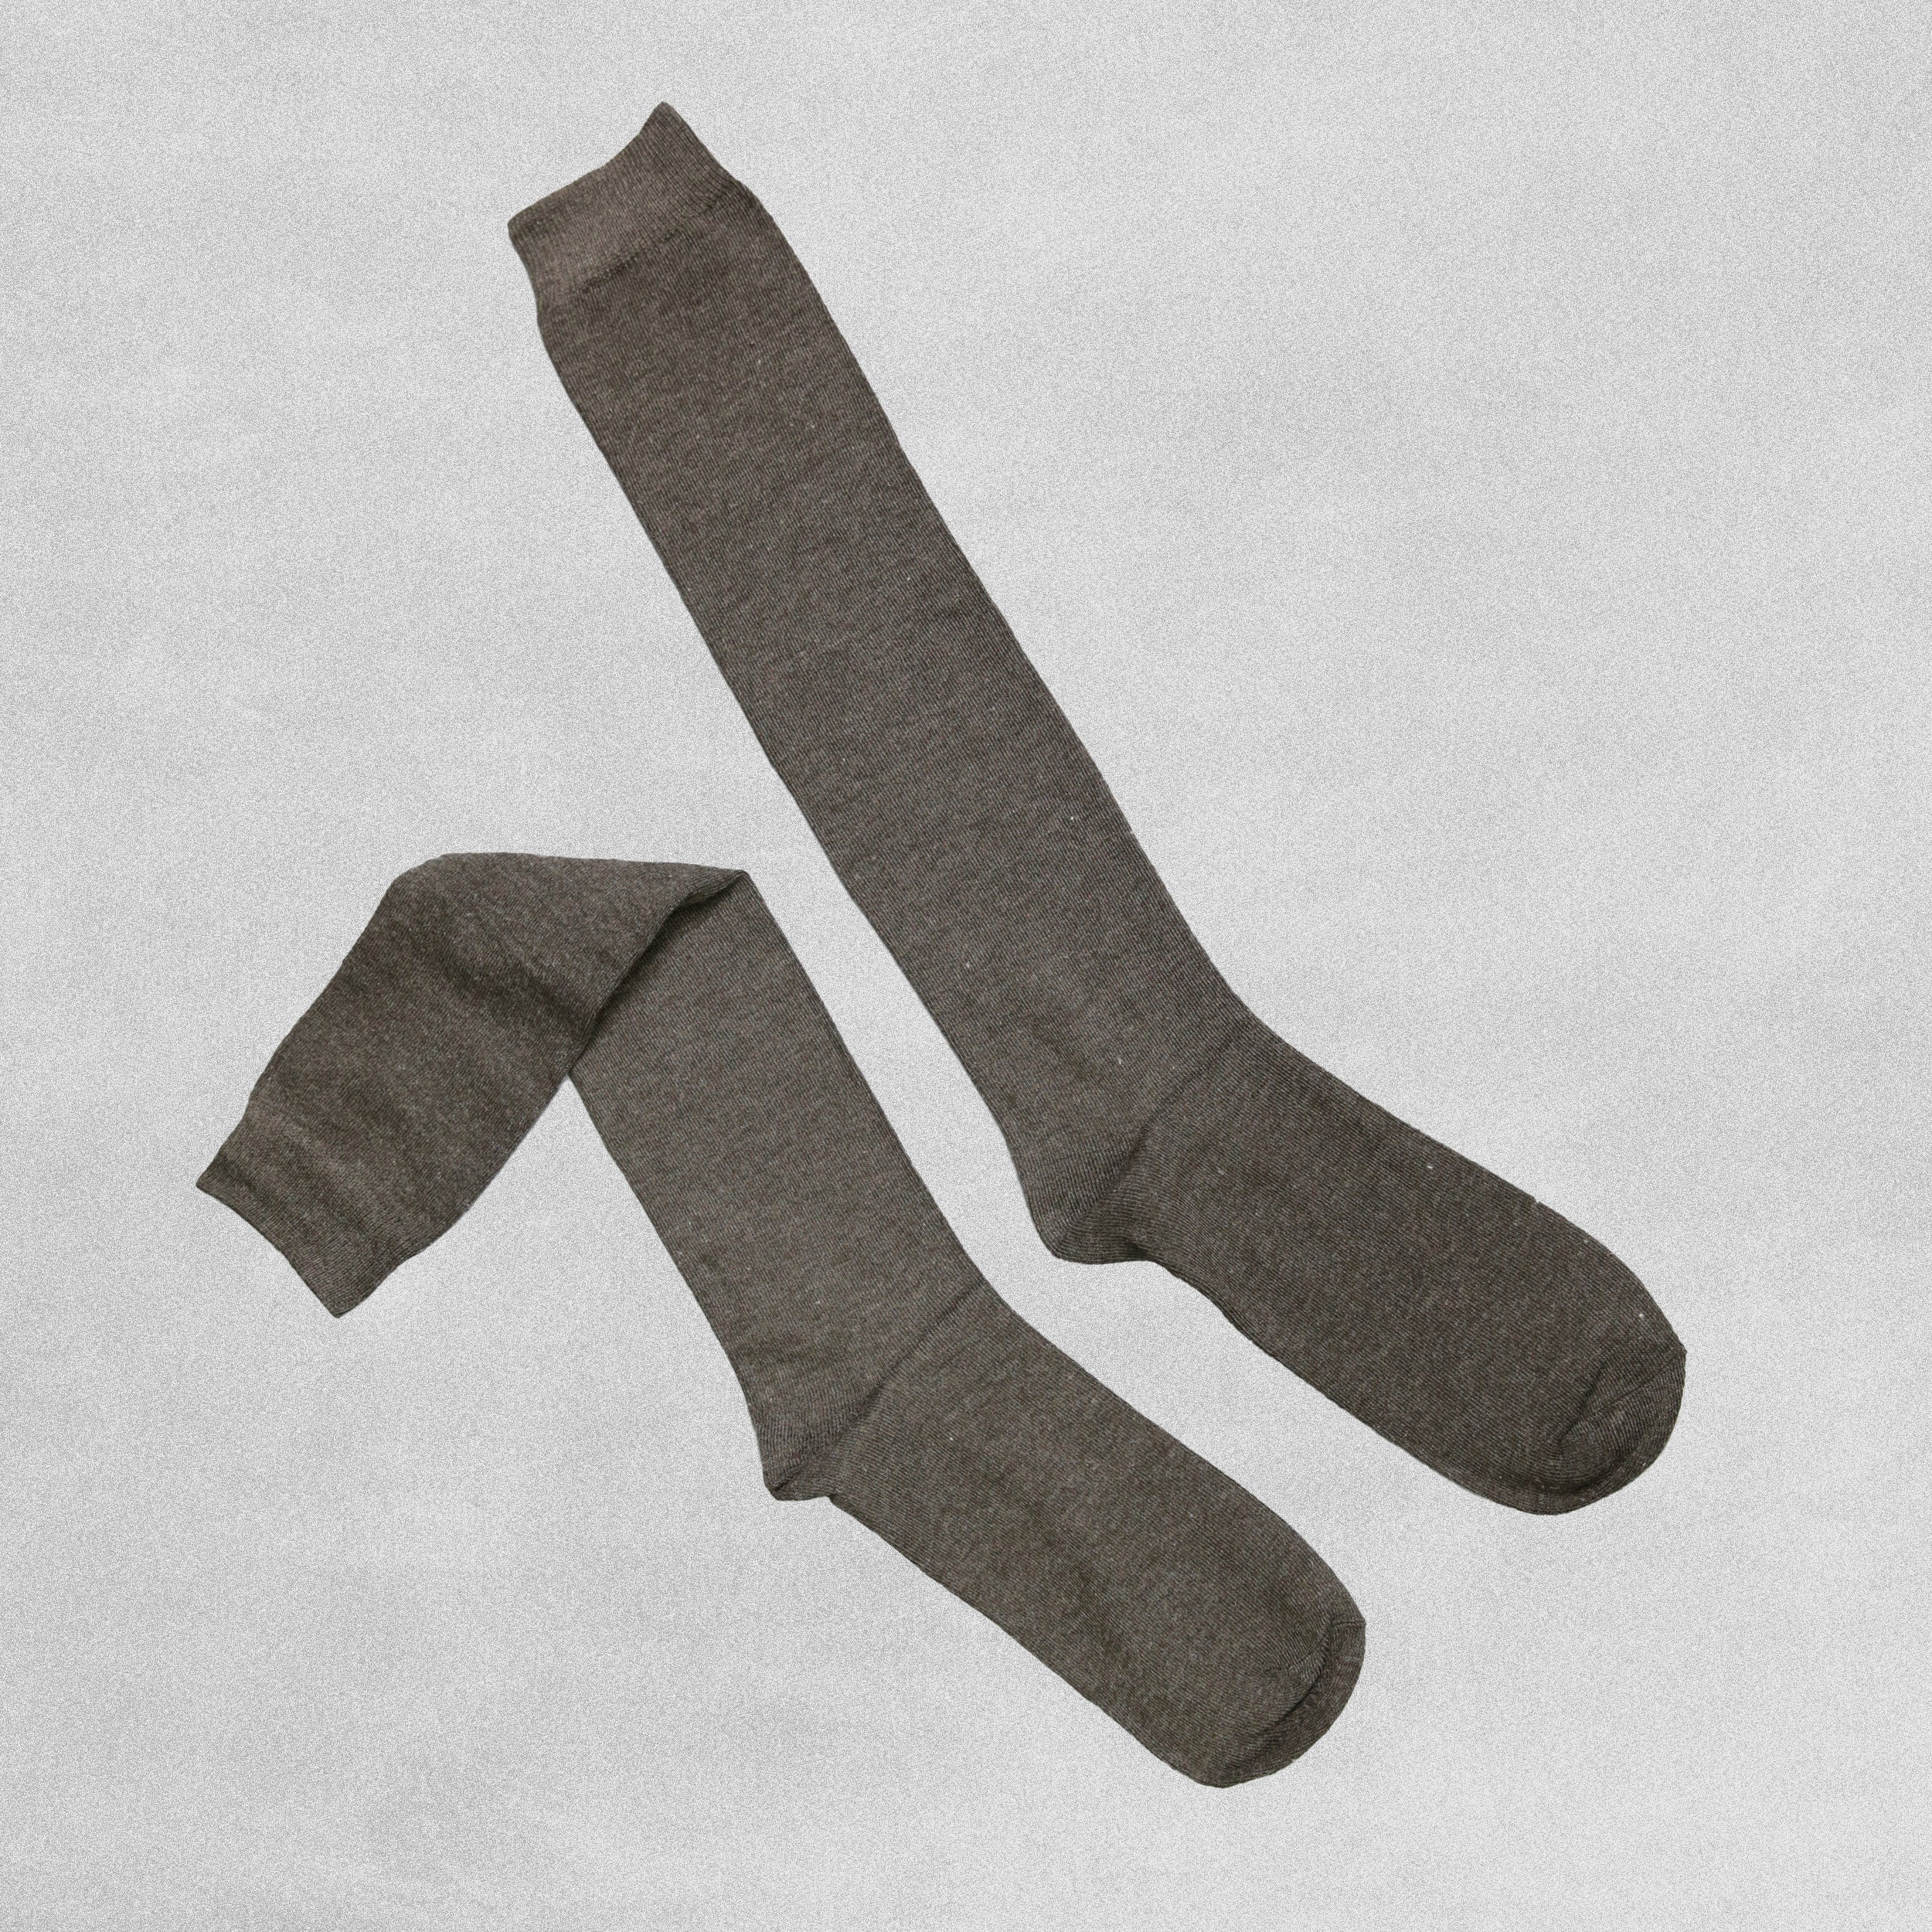 B.Fortuna Mens Knee Socks Assorted Colours Size 40-46 (UK 7-11) - 3 Pairs